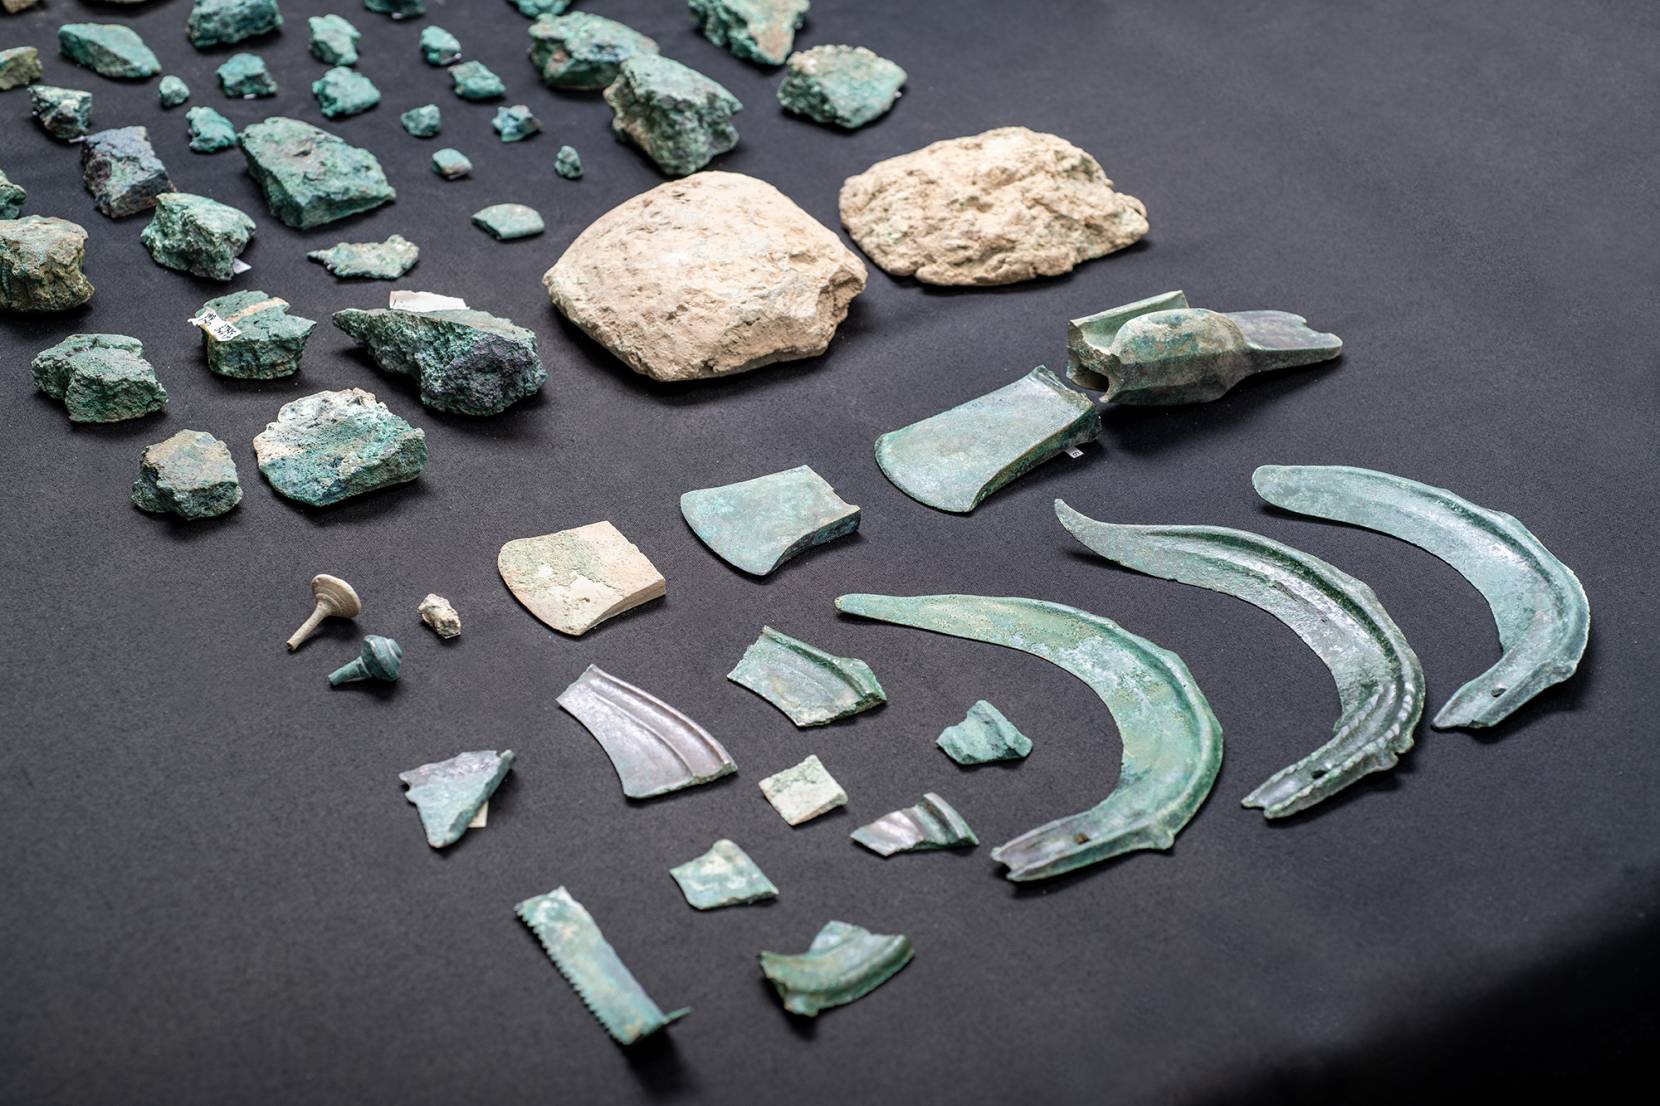 15 BC Roman expedition in the Swiss Alps uncovers 80 distinct Bronze Age artifacts 1